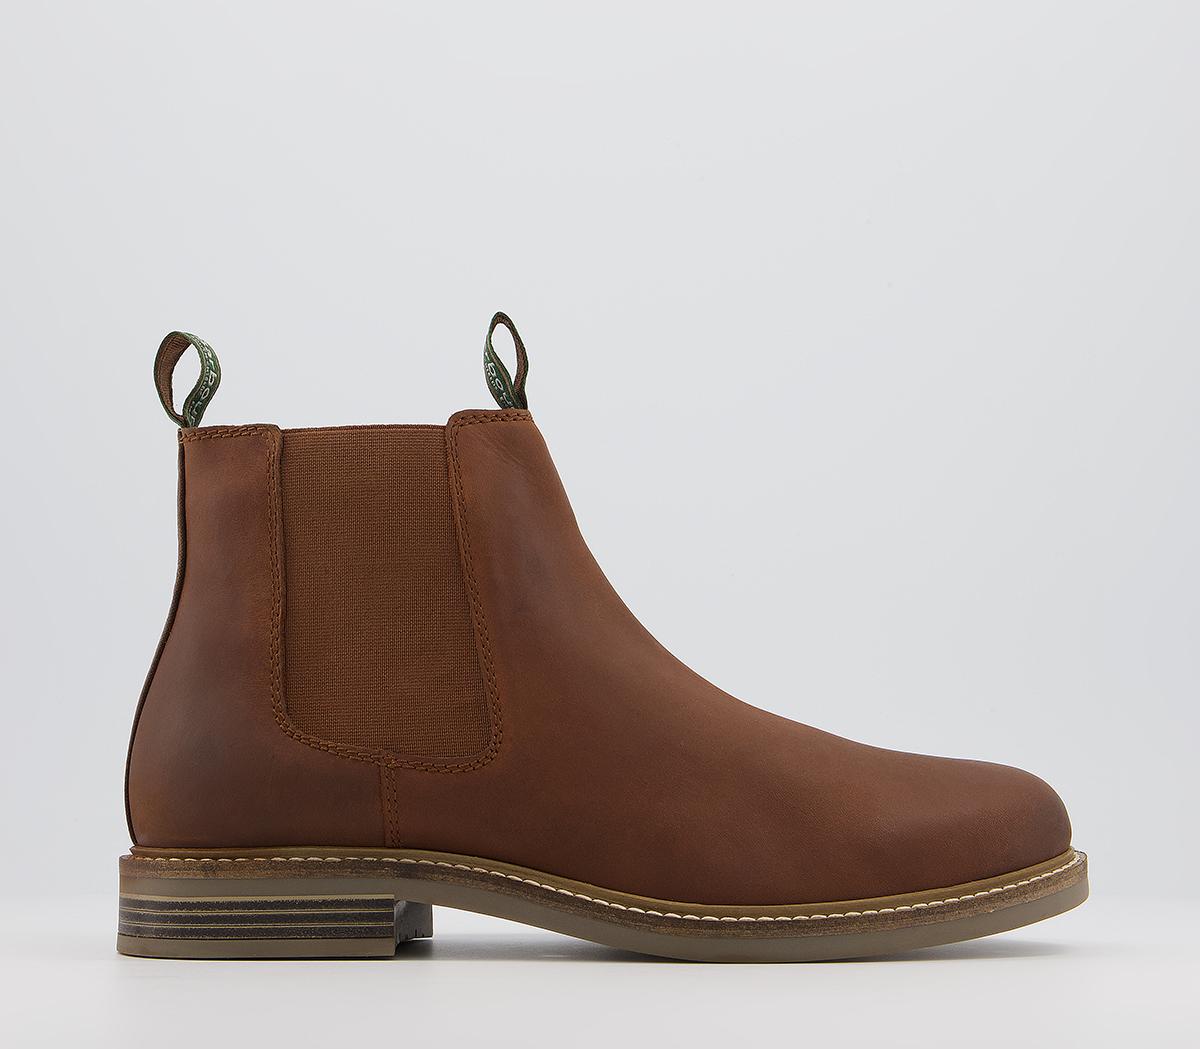 Barbour Farsley Chelsea Boots Tan - Boots